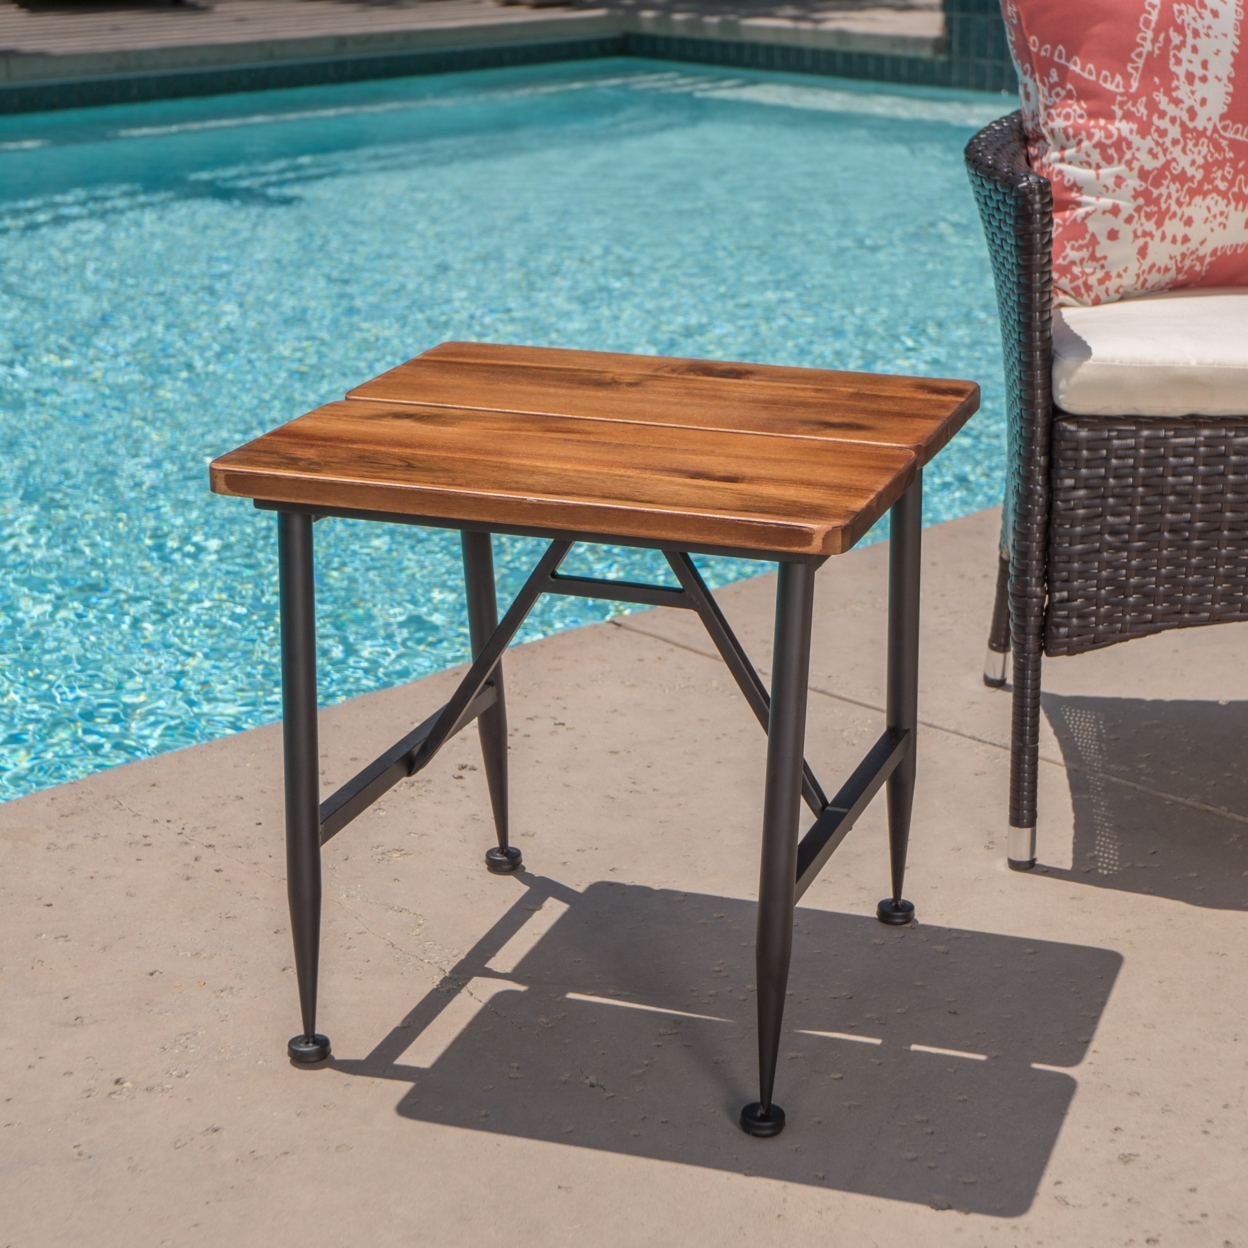 Everbold Outdoor Rustic Industrial Acacia Wood End Table With Metal Frame